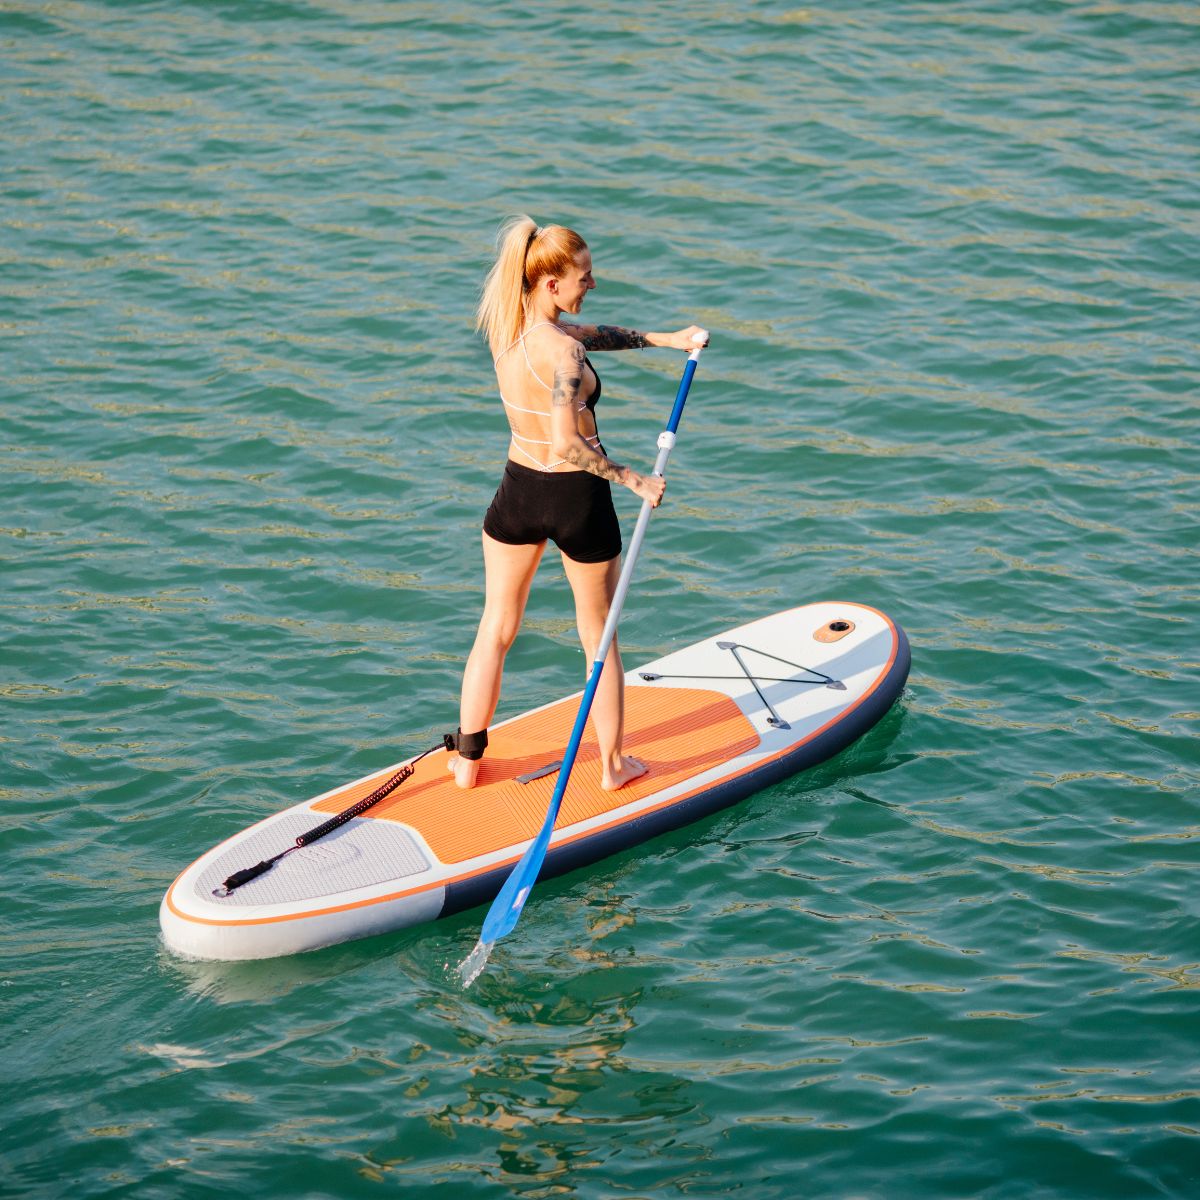 Female on a paddle board in the water